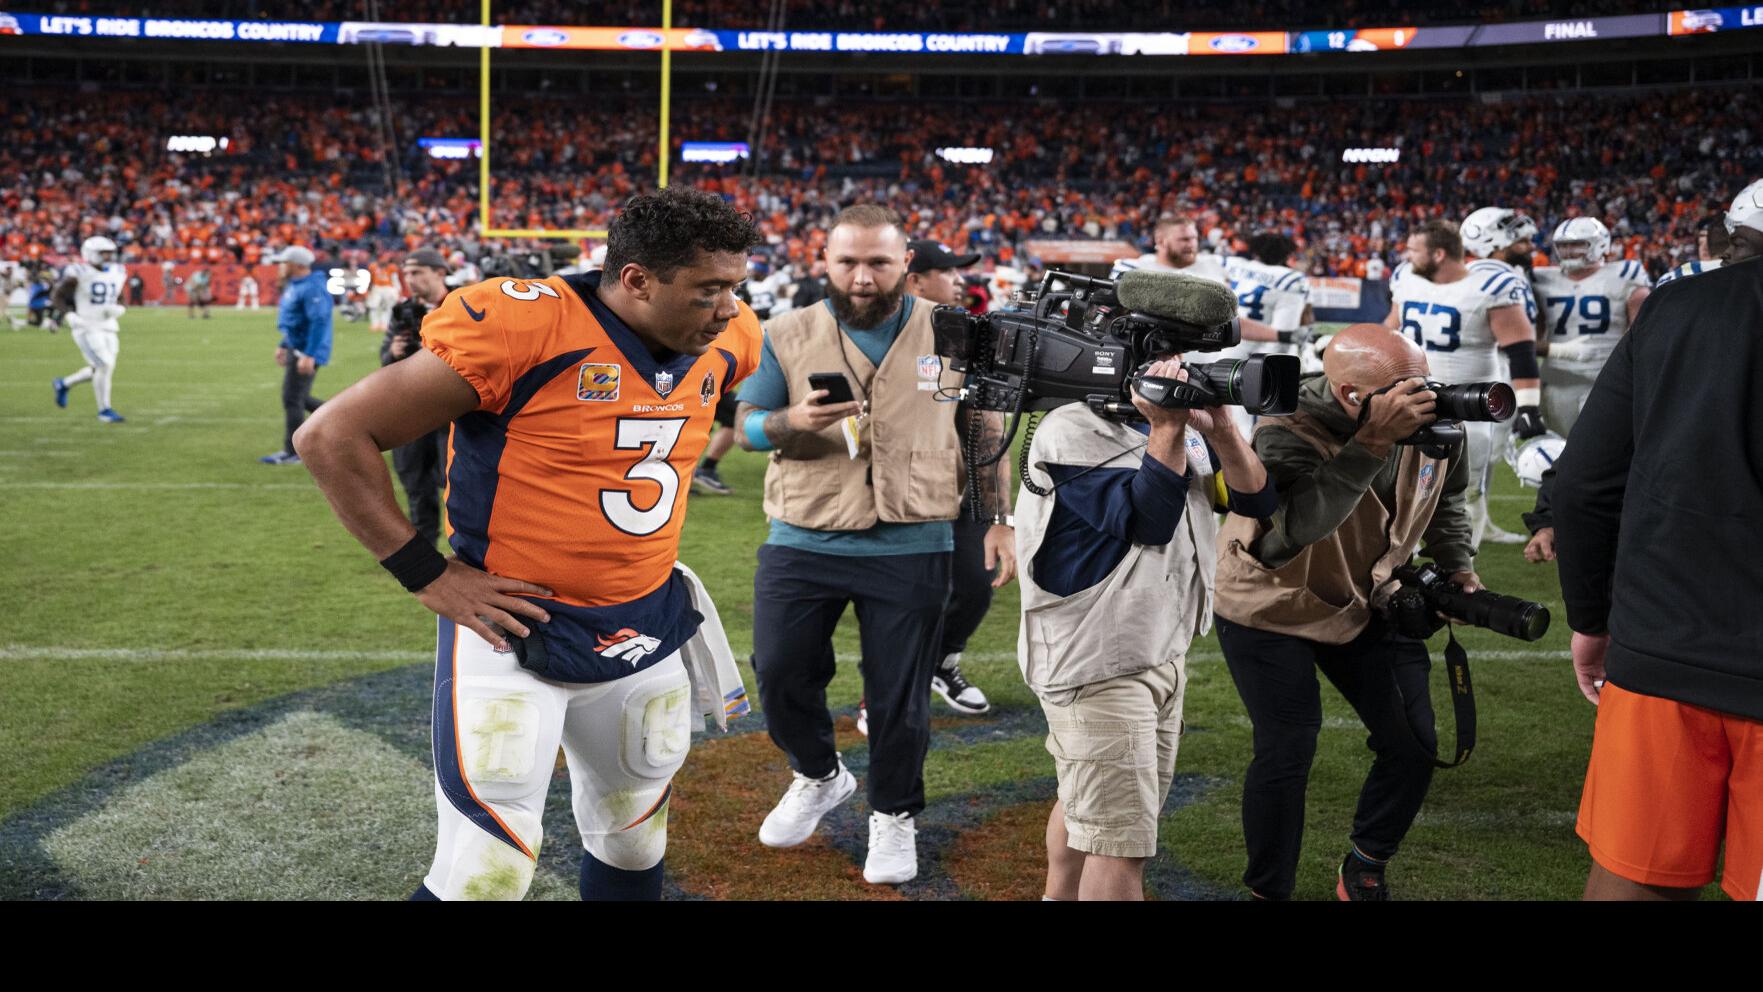 Paul Klee: Sorry, America, for a Broncos team that should be flexed out of  prime-time TV, Paul Klee